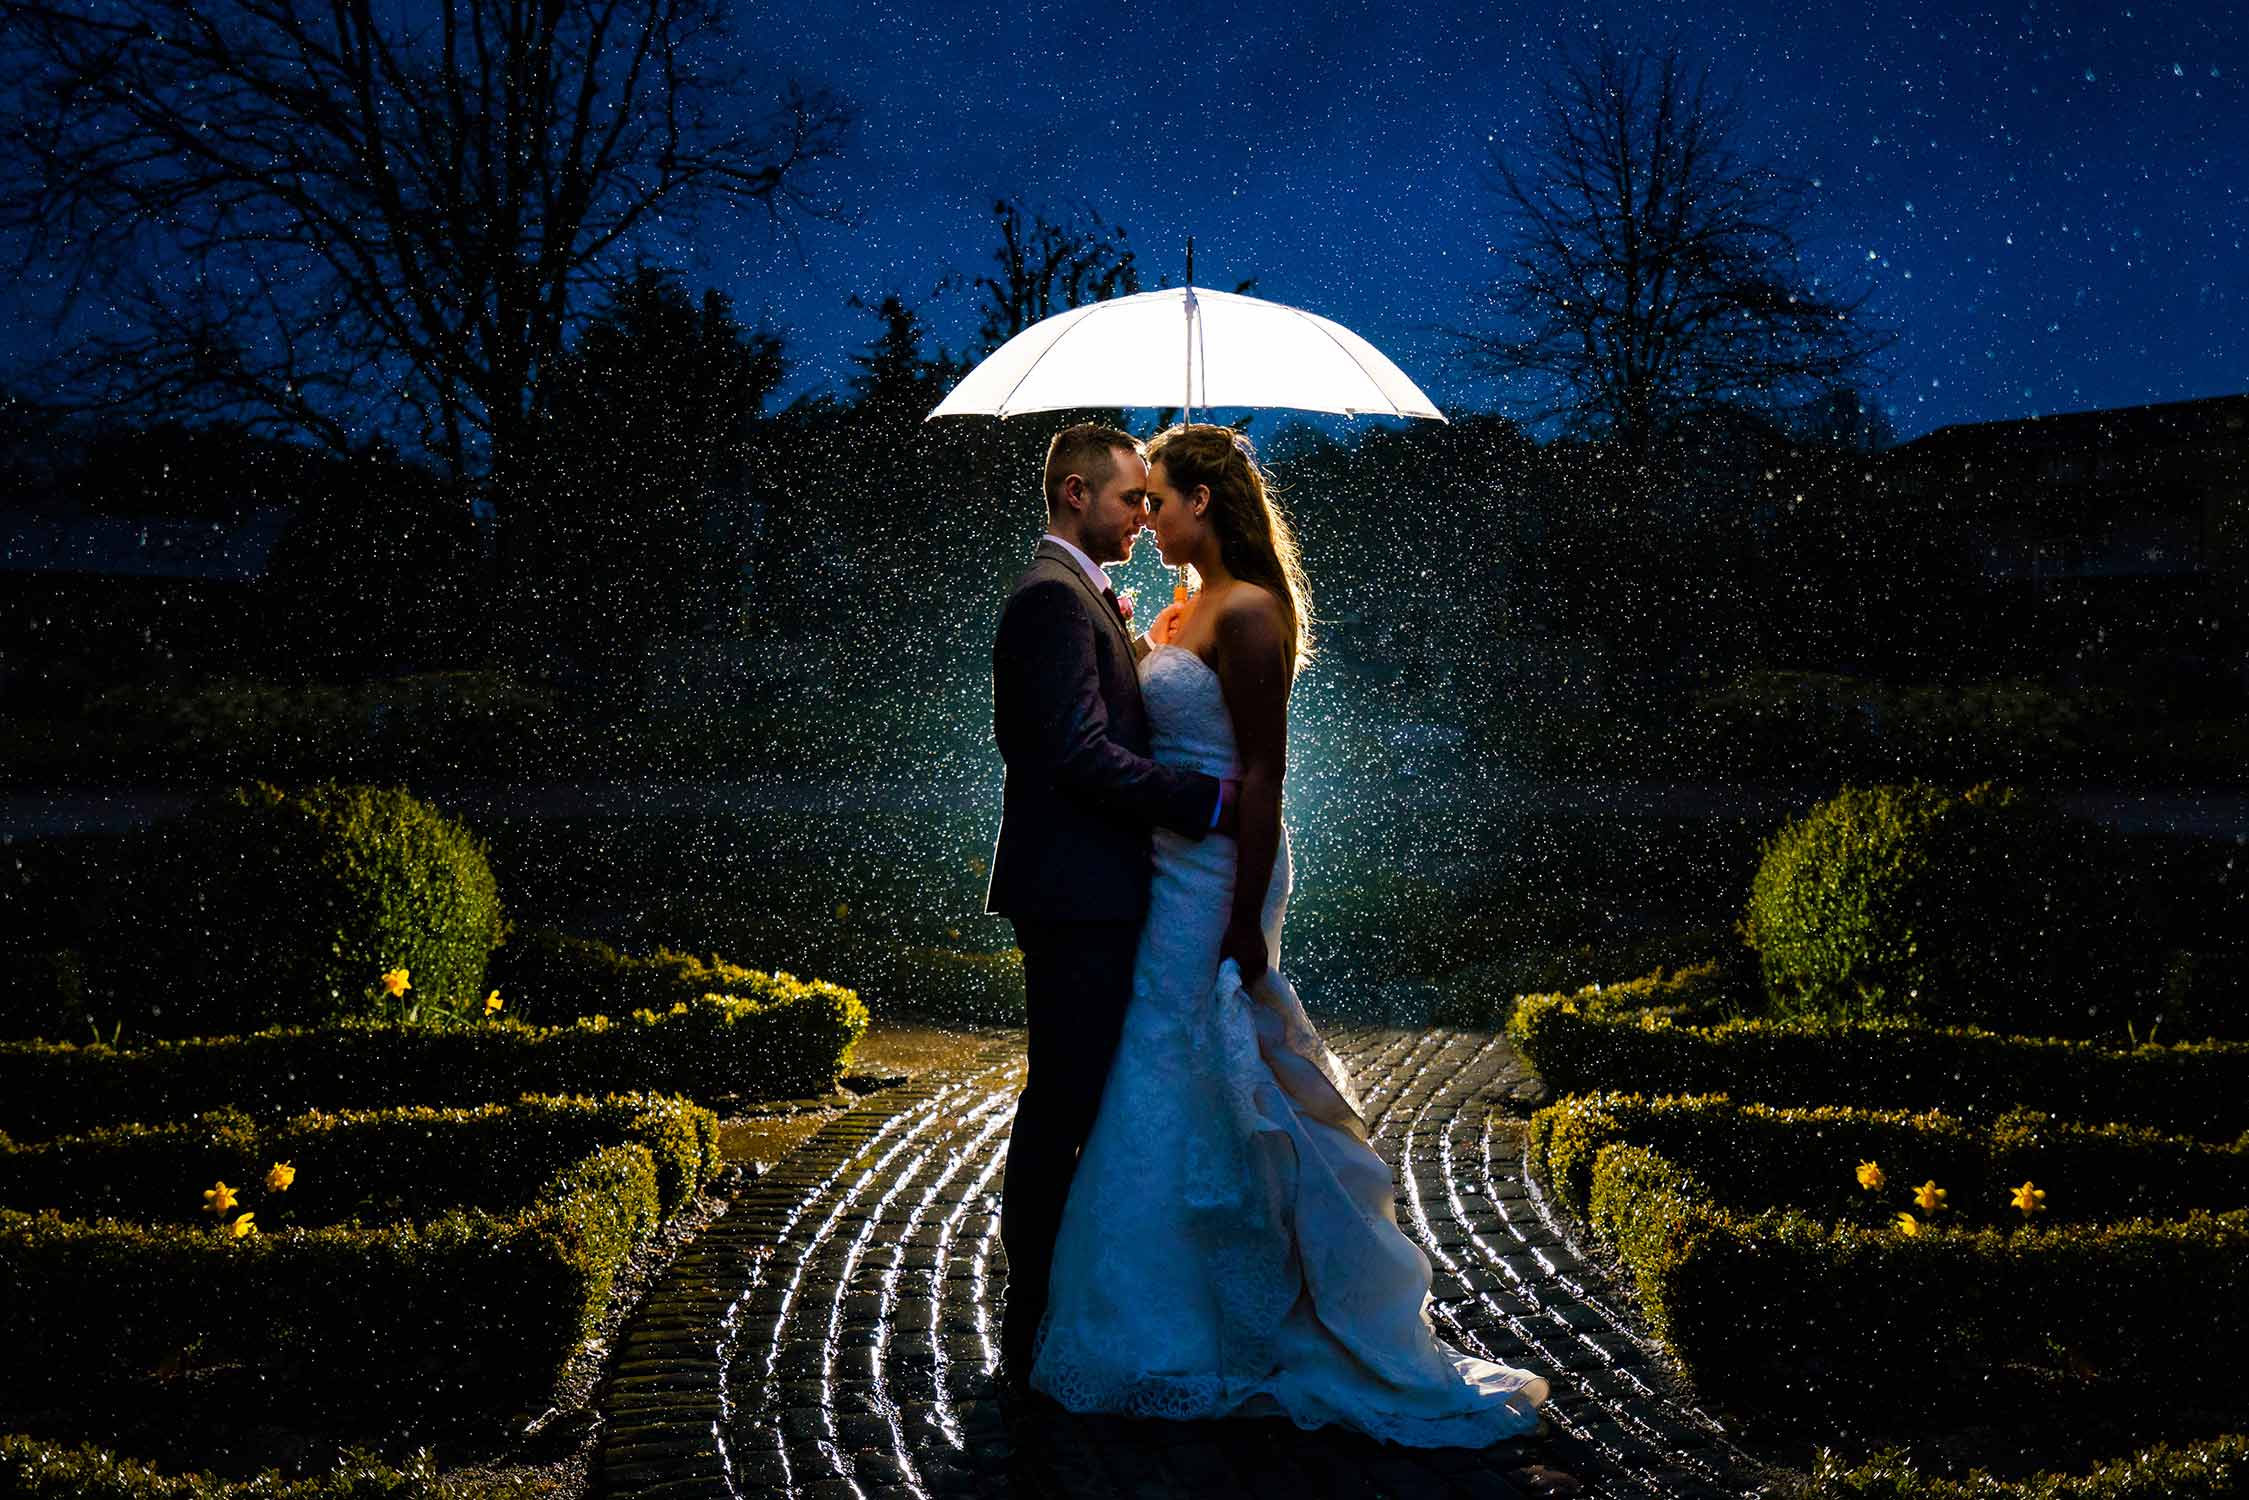 Wedding photo from Colwick Hall in Nottingham. Bride & groom in the rain